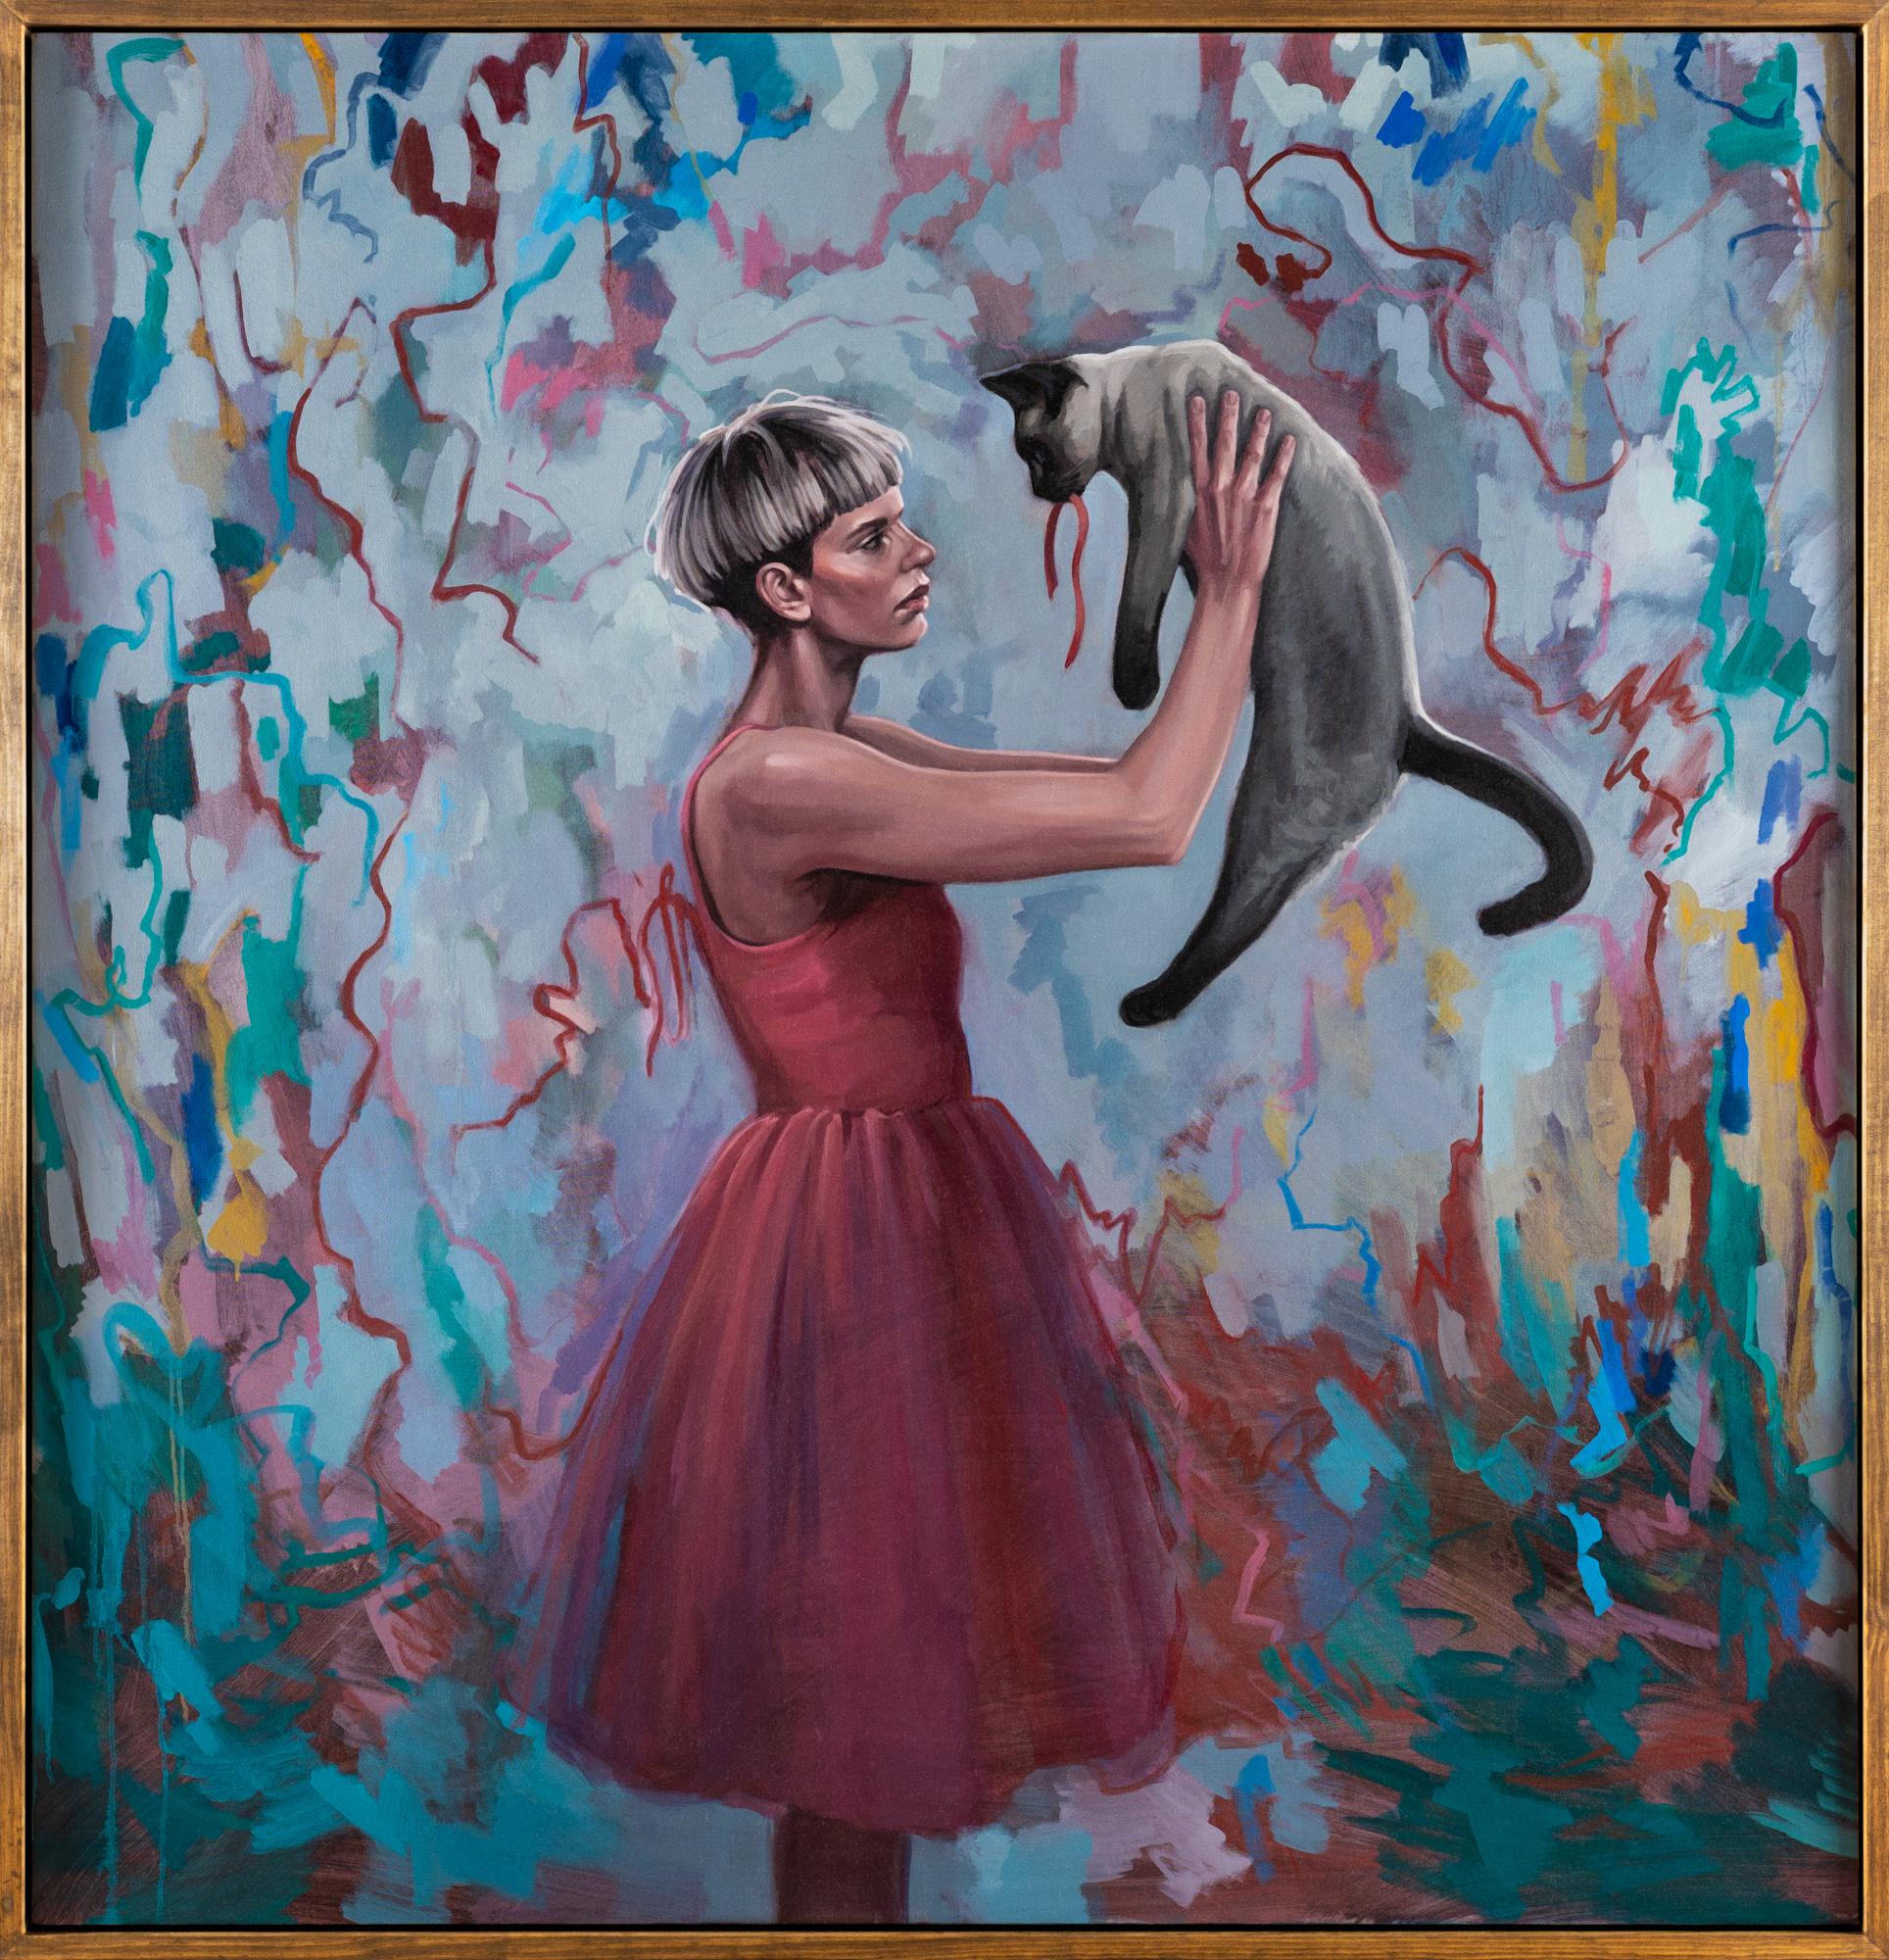 Katherine Fraser Figurative Painting - "The Gift" Female figure holding cat, abstract background, oil on canvas